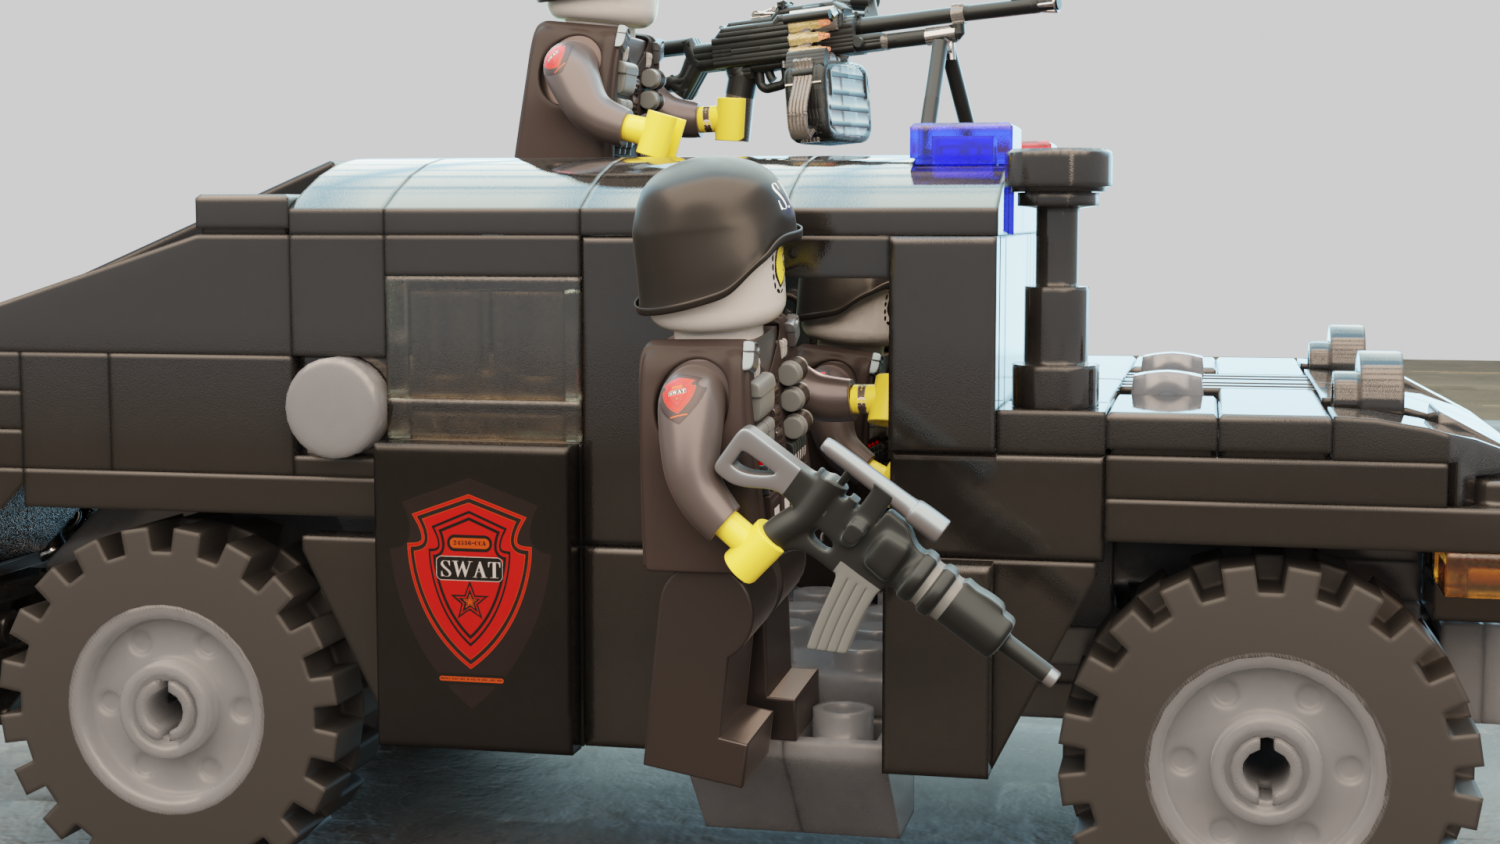 SWAT Lego VAN and Special Squad Officers 3D model rigged